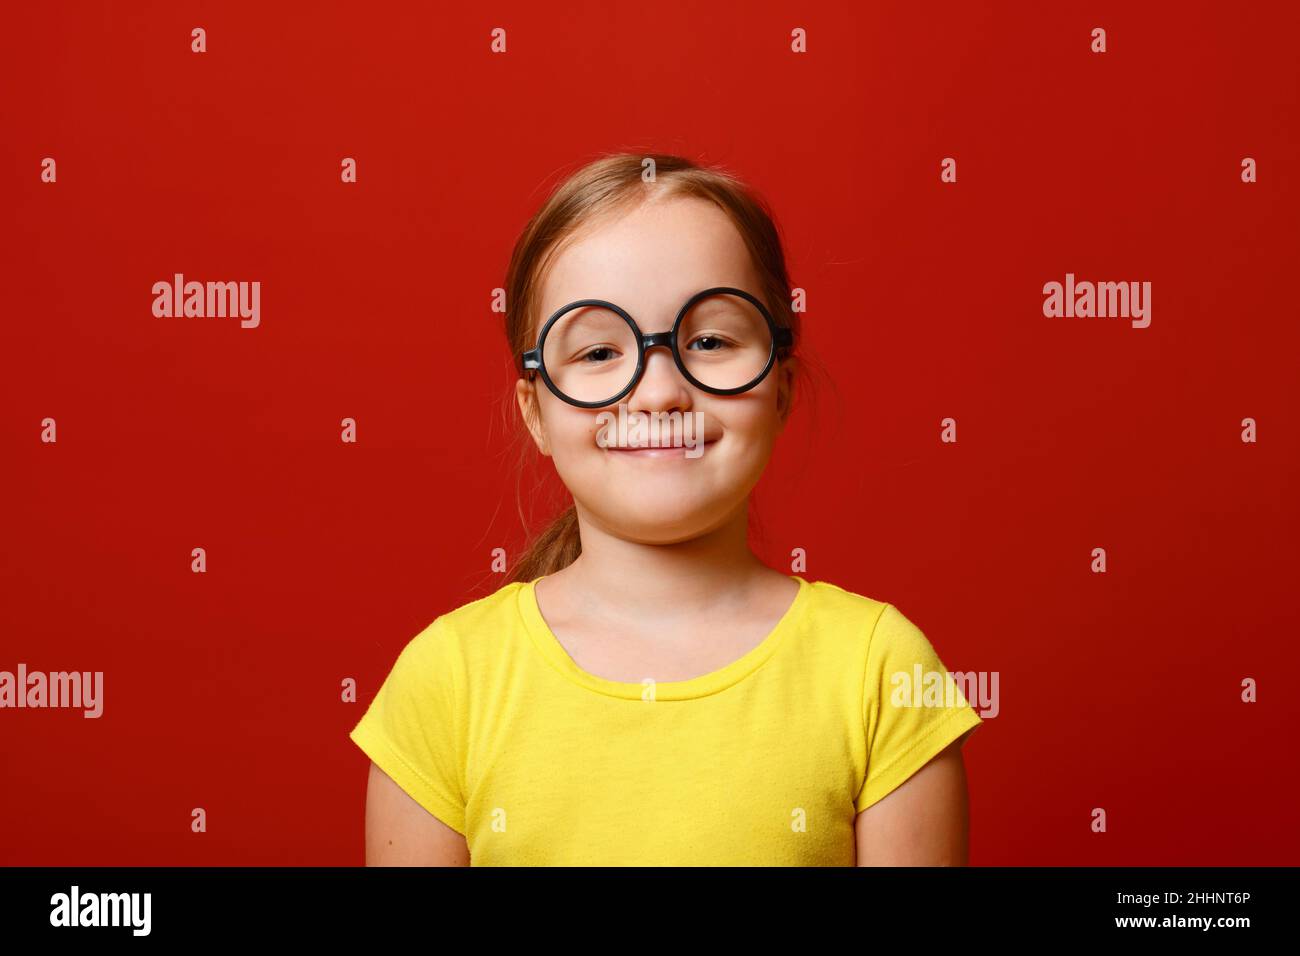 Funny little girl with glasses. Schoolgirl child in a yellow t-shirt on a red isolated background. Stock Photo